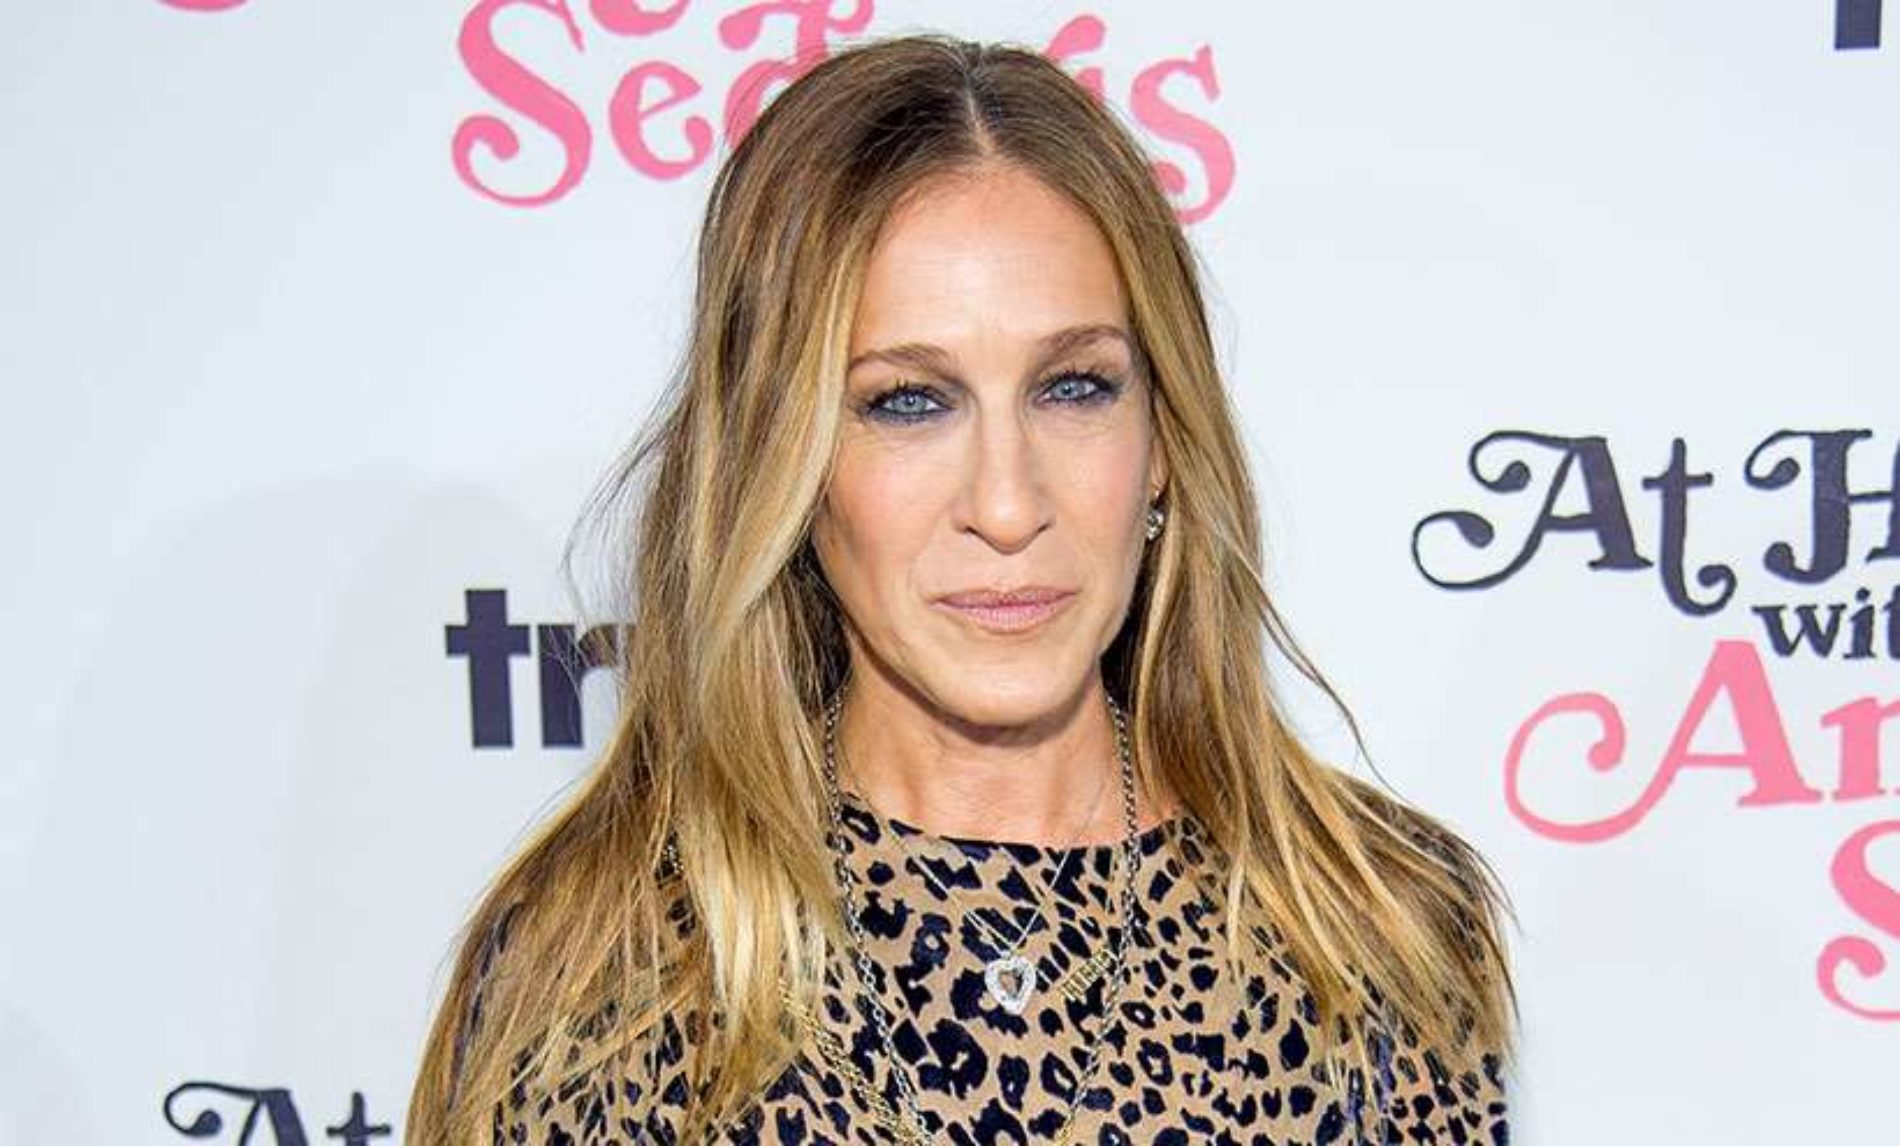 Sarah Jessica Parker says Kim Cattrall said “things that were really hurtful”